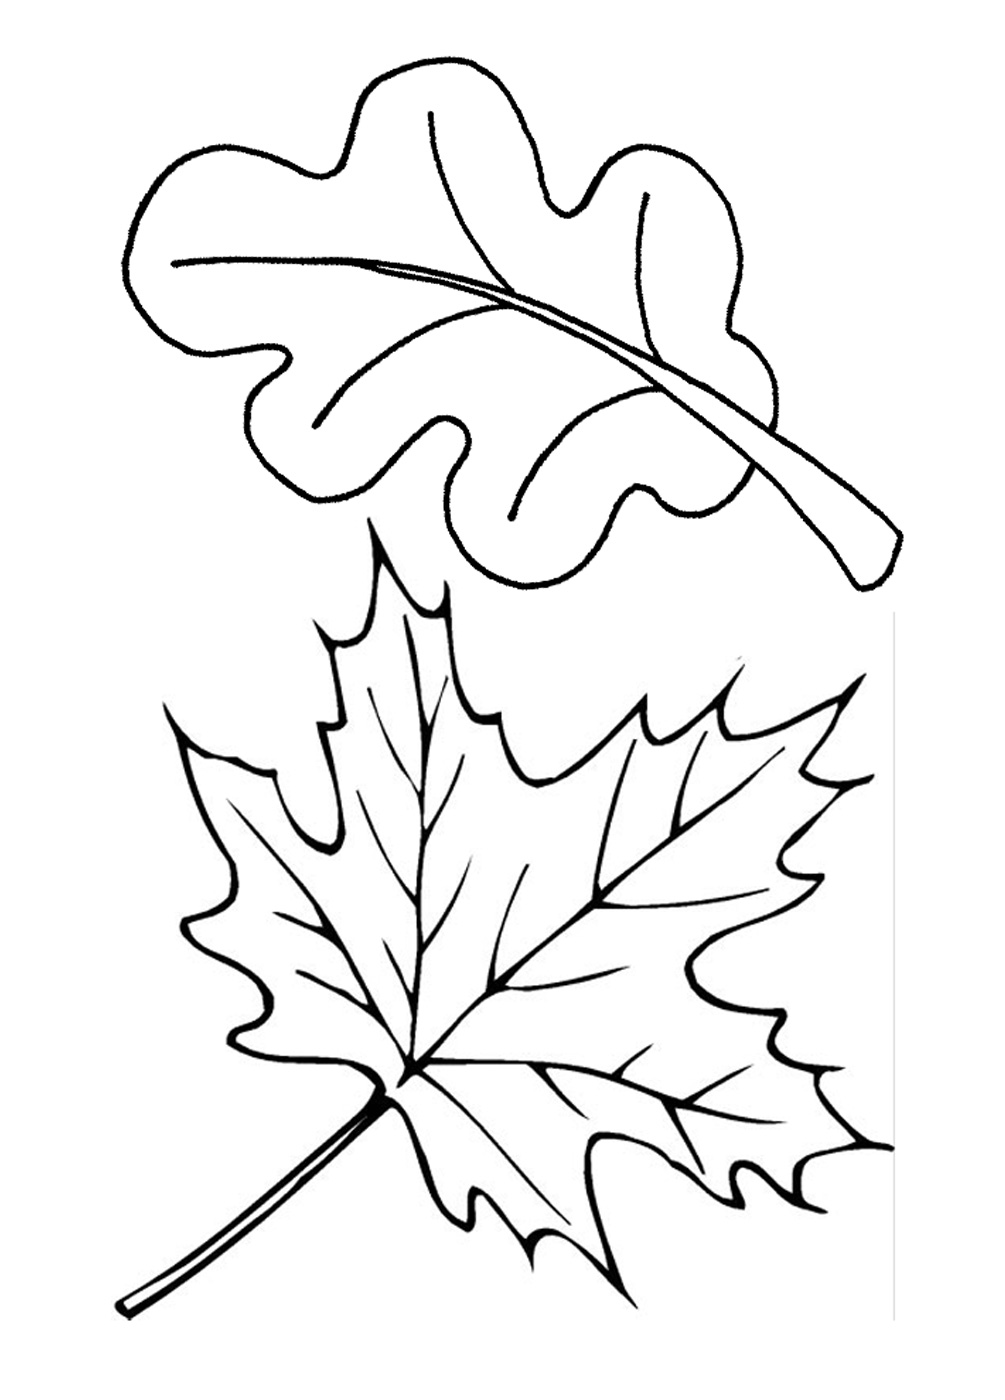 Coloring pages free printable leaf coloring pages